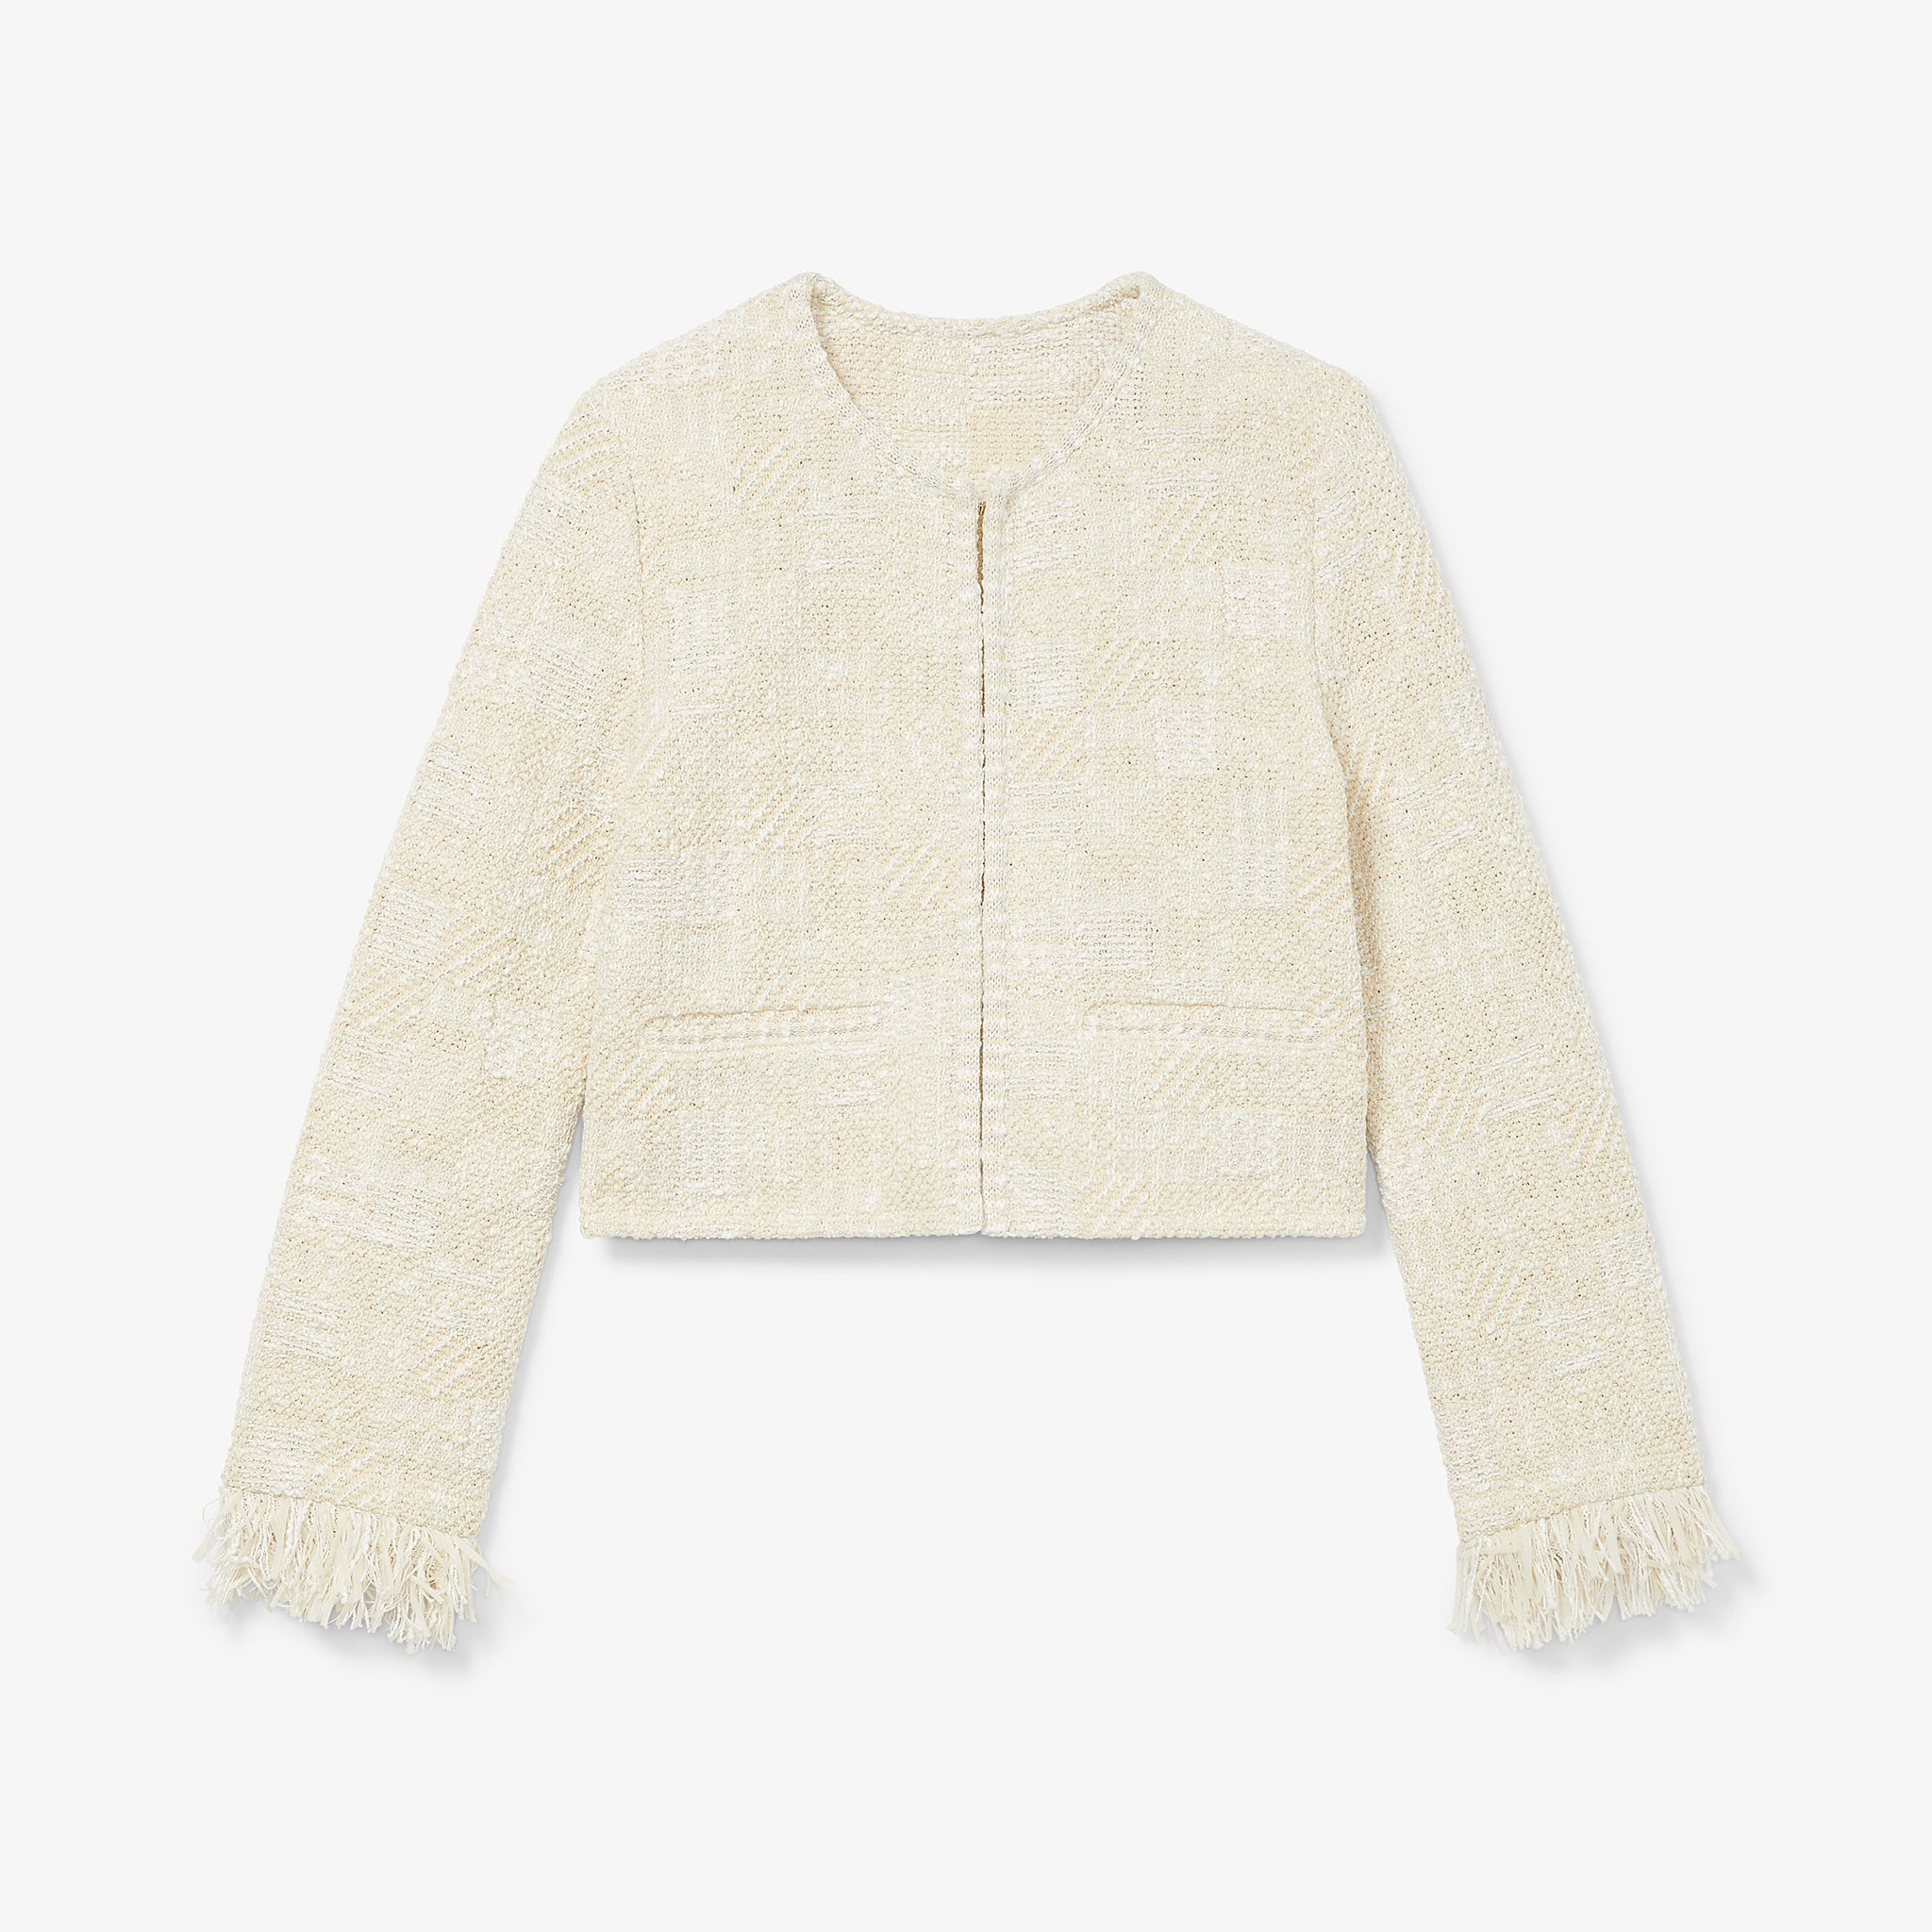 Packshot image of the Lilia Jacket - Interweave in Taupe / Ivory